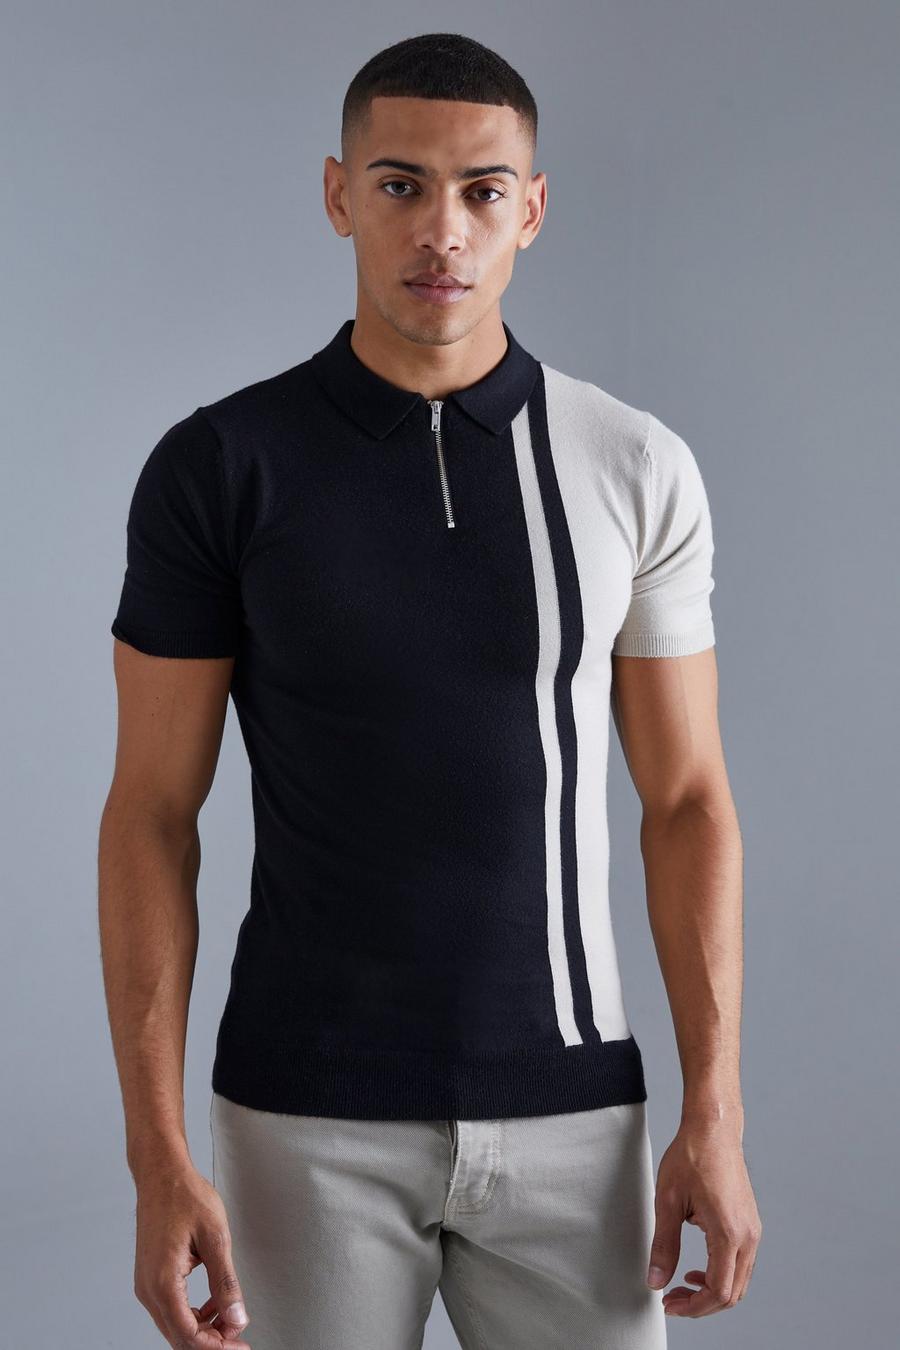 Black Short Sleeve Muscle Fit Colour Block Polo